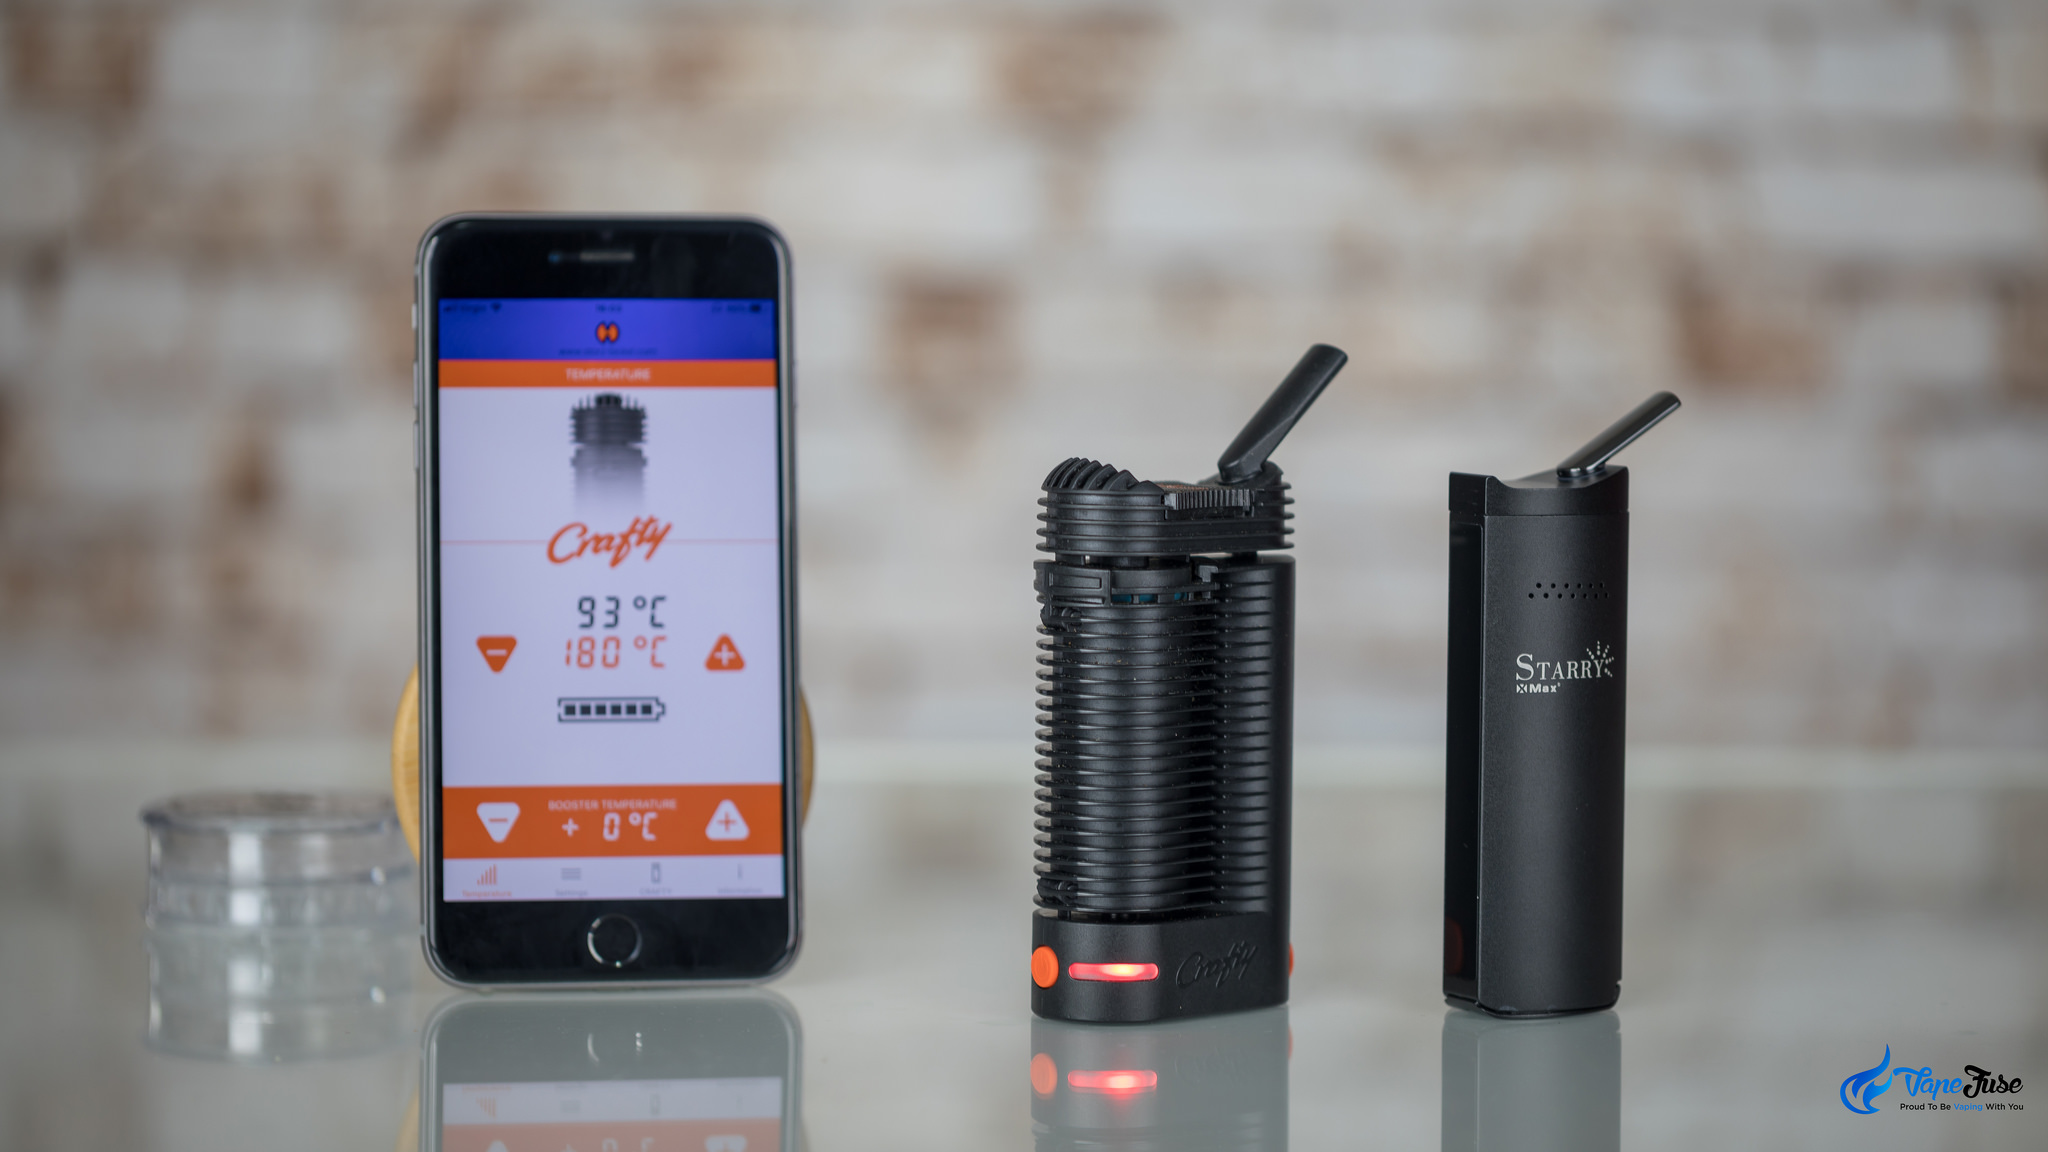 Storz and Bickel Crafty Vaporizer with mobile App